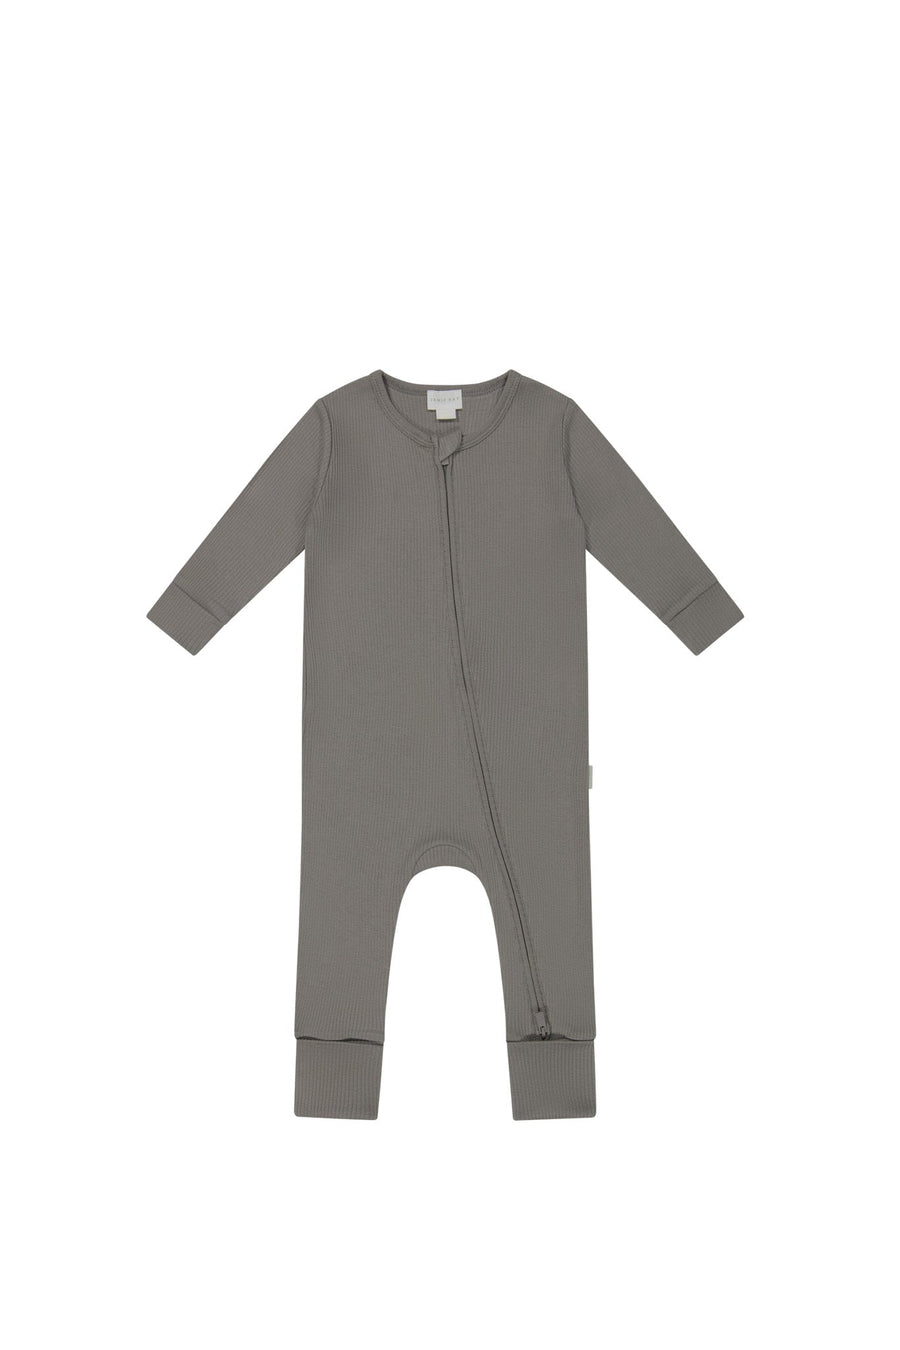 Organic Cotton Modal Gracelyn Onepiece - Cobblestone Childrens Onepiece from Jamie Kay USA